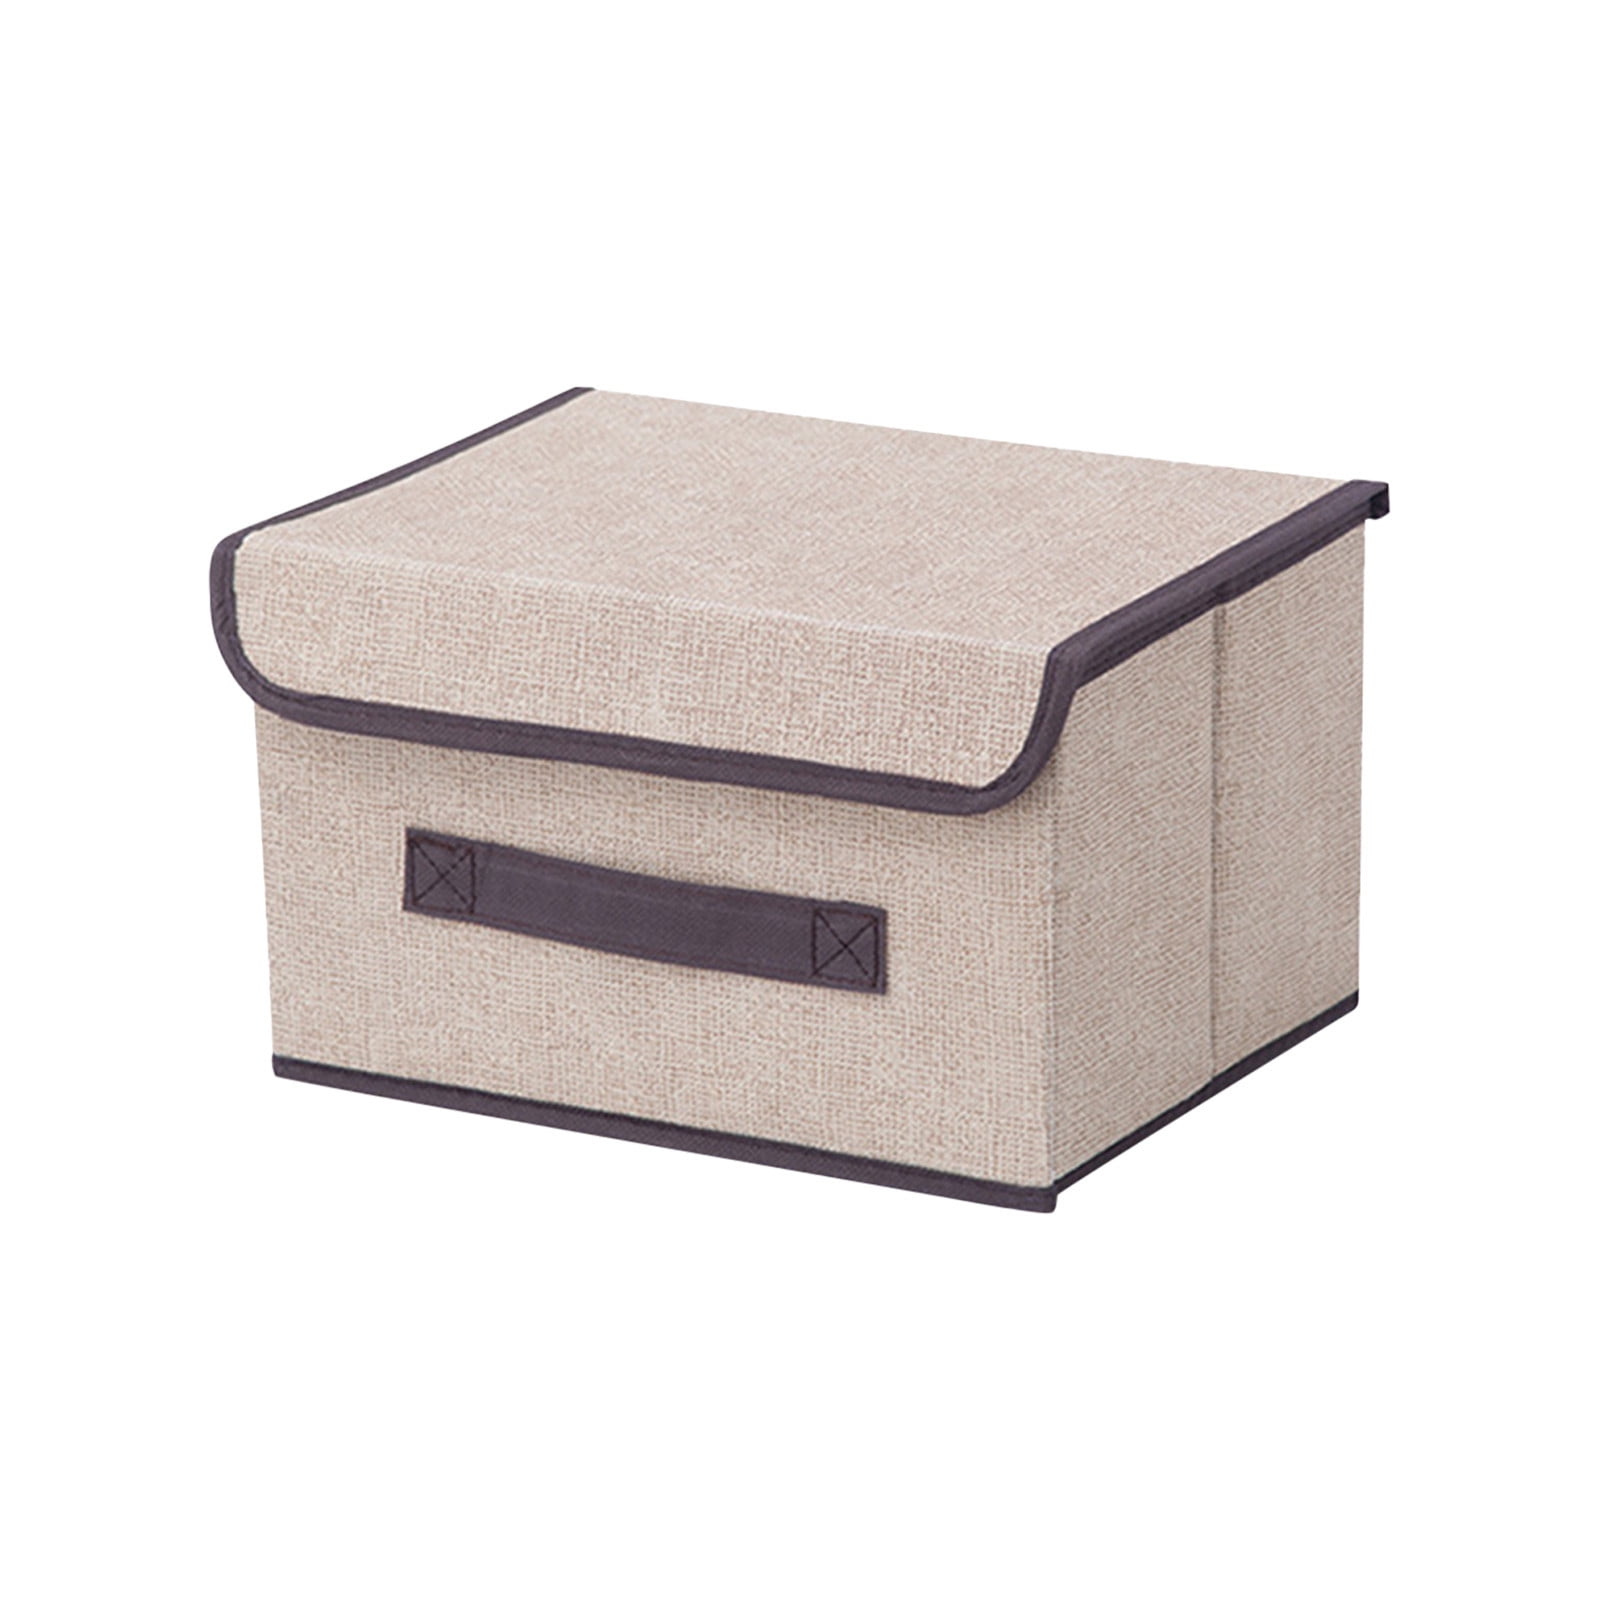 Cotton And Linen Cloth Covered Storage Box Clothing And Debris Storage ...